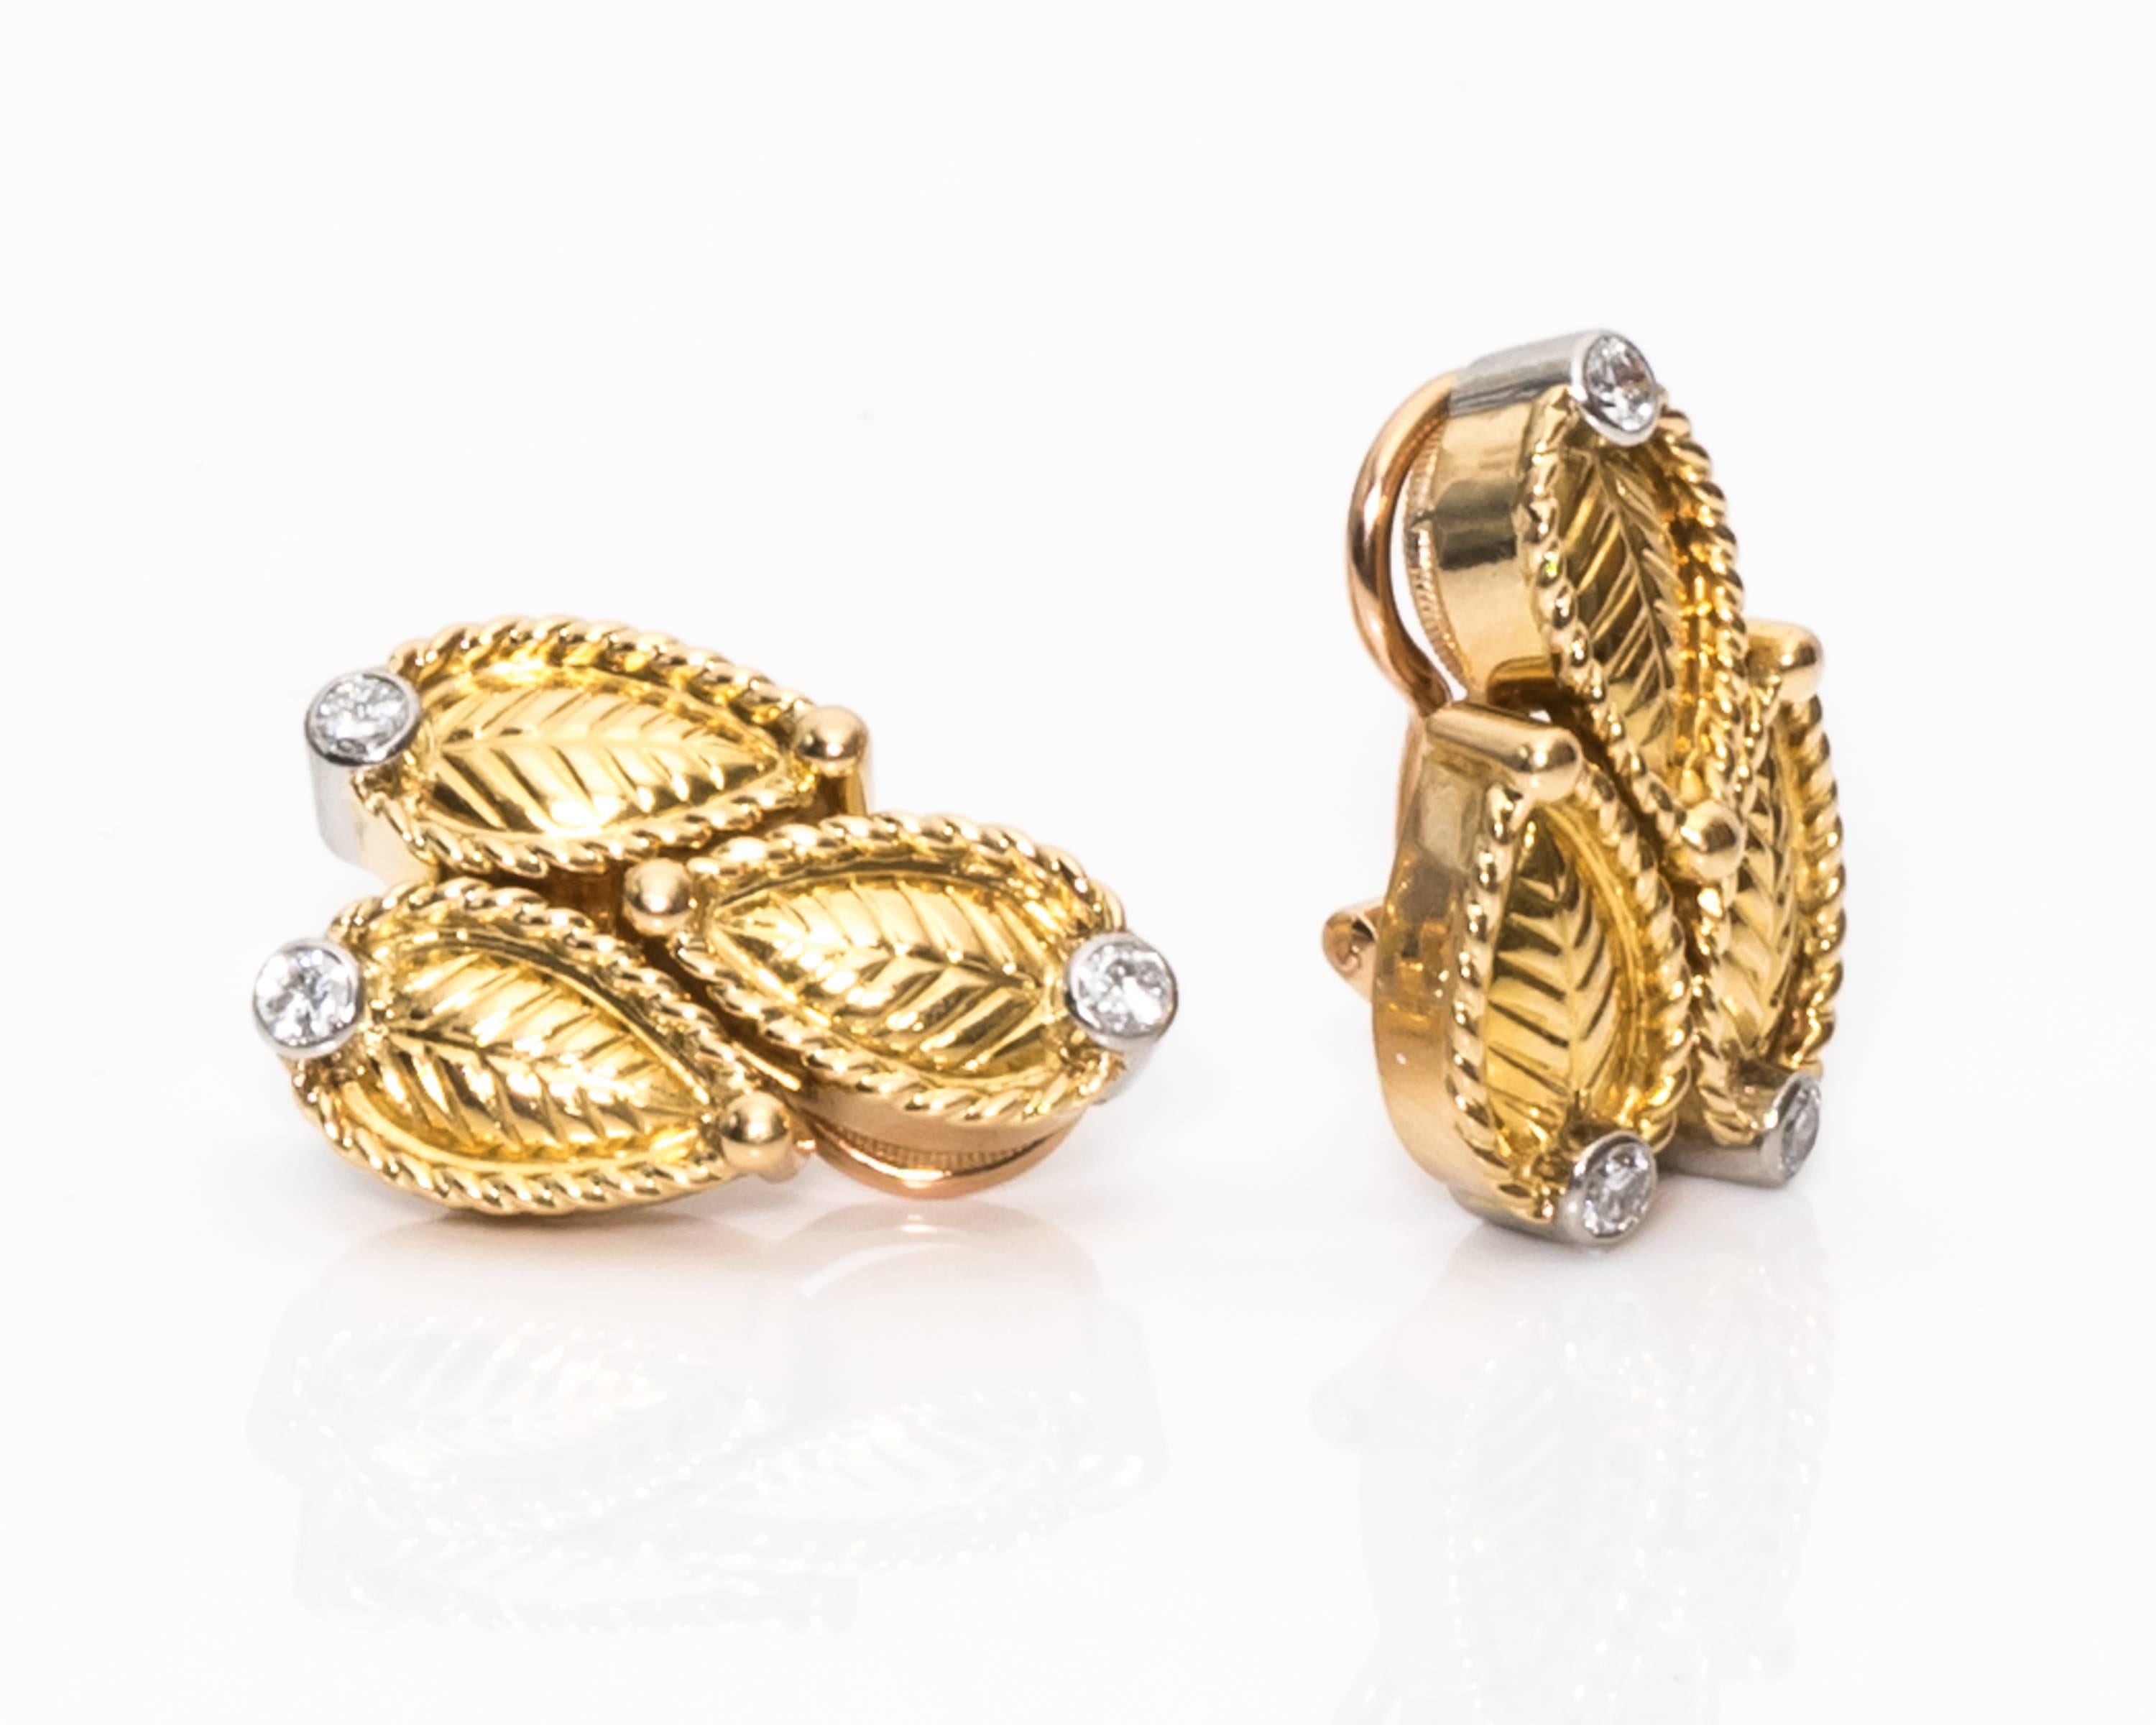 Cartier Paris Clip Back Earrings - 18 Karat Yellow Gold, White Gold, Diamonds

3-Leaf Motif Design with Diamonds
3 Diamonds On Each Earring
F Color, VS1 Clarity, 0.50 carat Total Weight
18 Karat Yellow Gold with White Gold Accents
Clip On